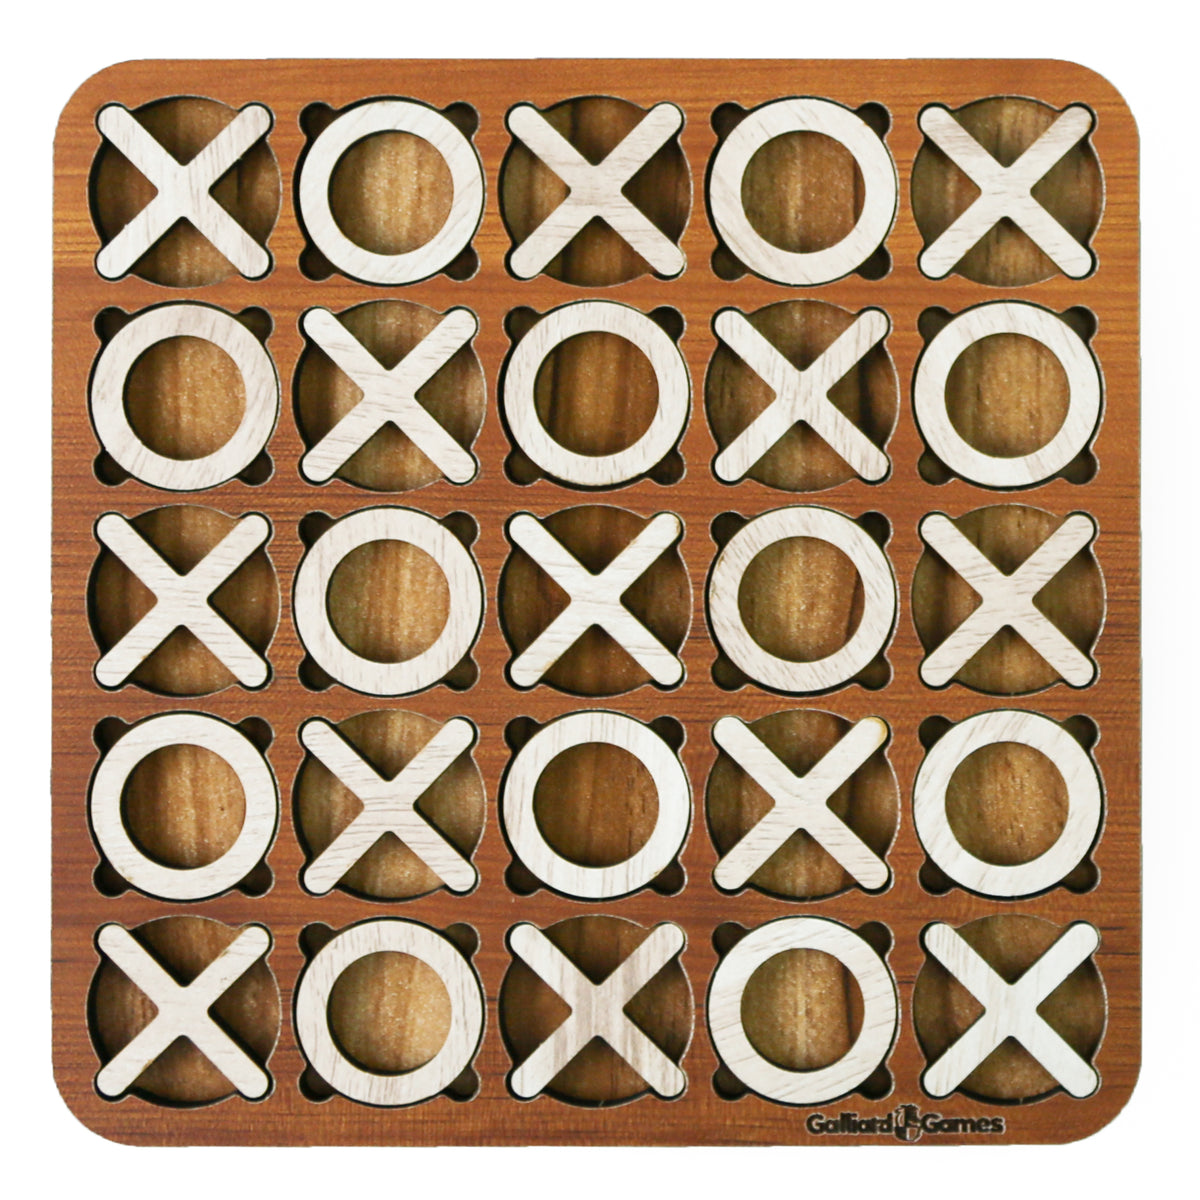 Buy Galliard Games Wooden Puzzle, Tic Tac Toe, Noughts & Crosses